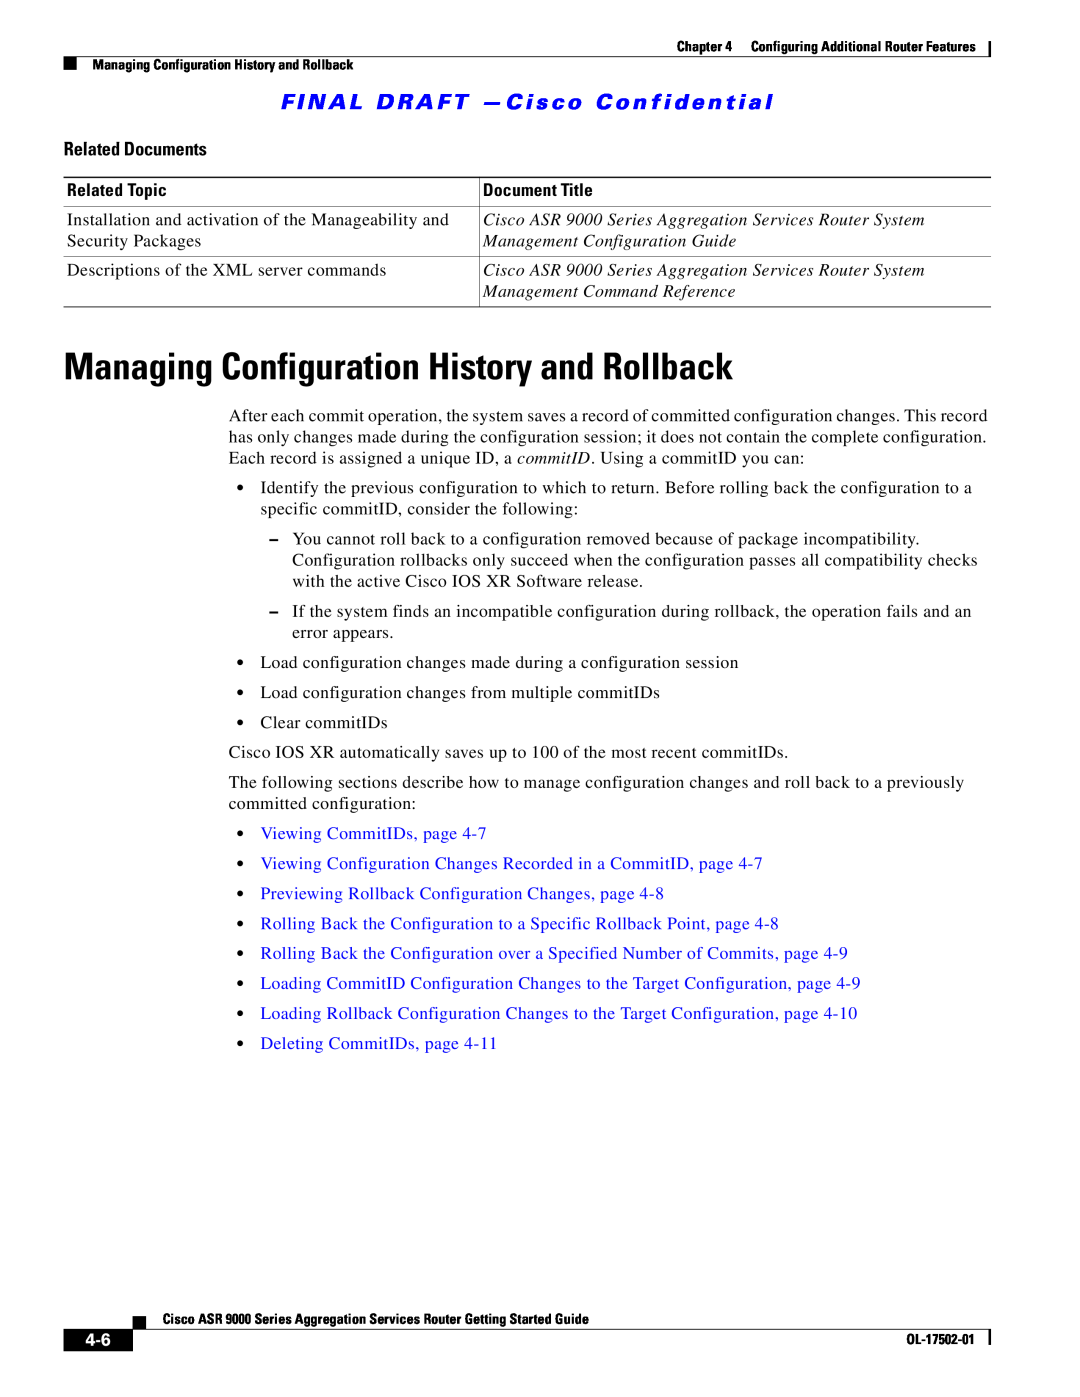 Cisco Systems A9K24X10GETR manual Managing Configuration History and Rollback, Related Documents, Viewing CommitIDs, page 